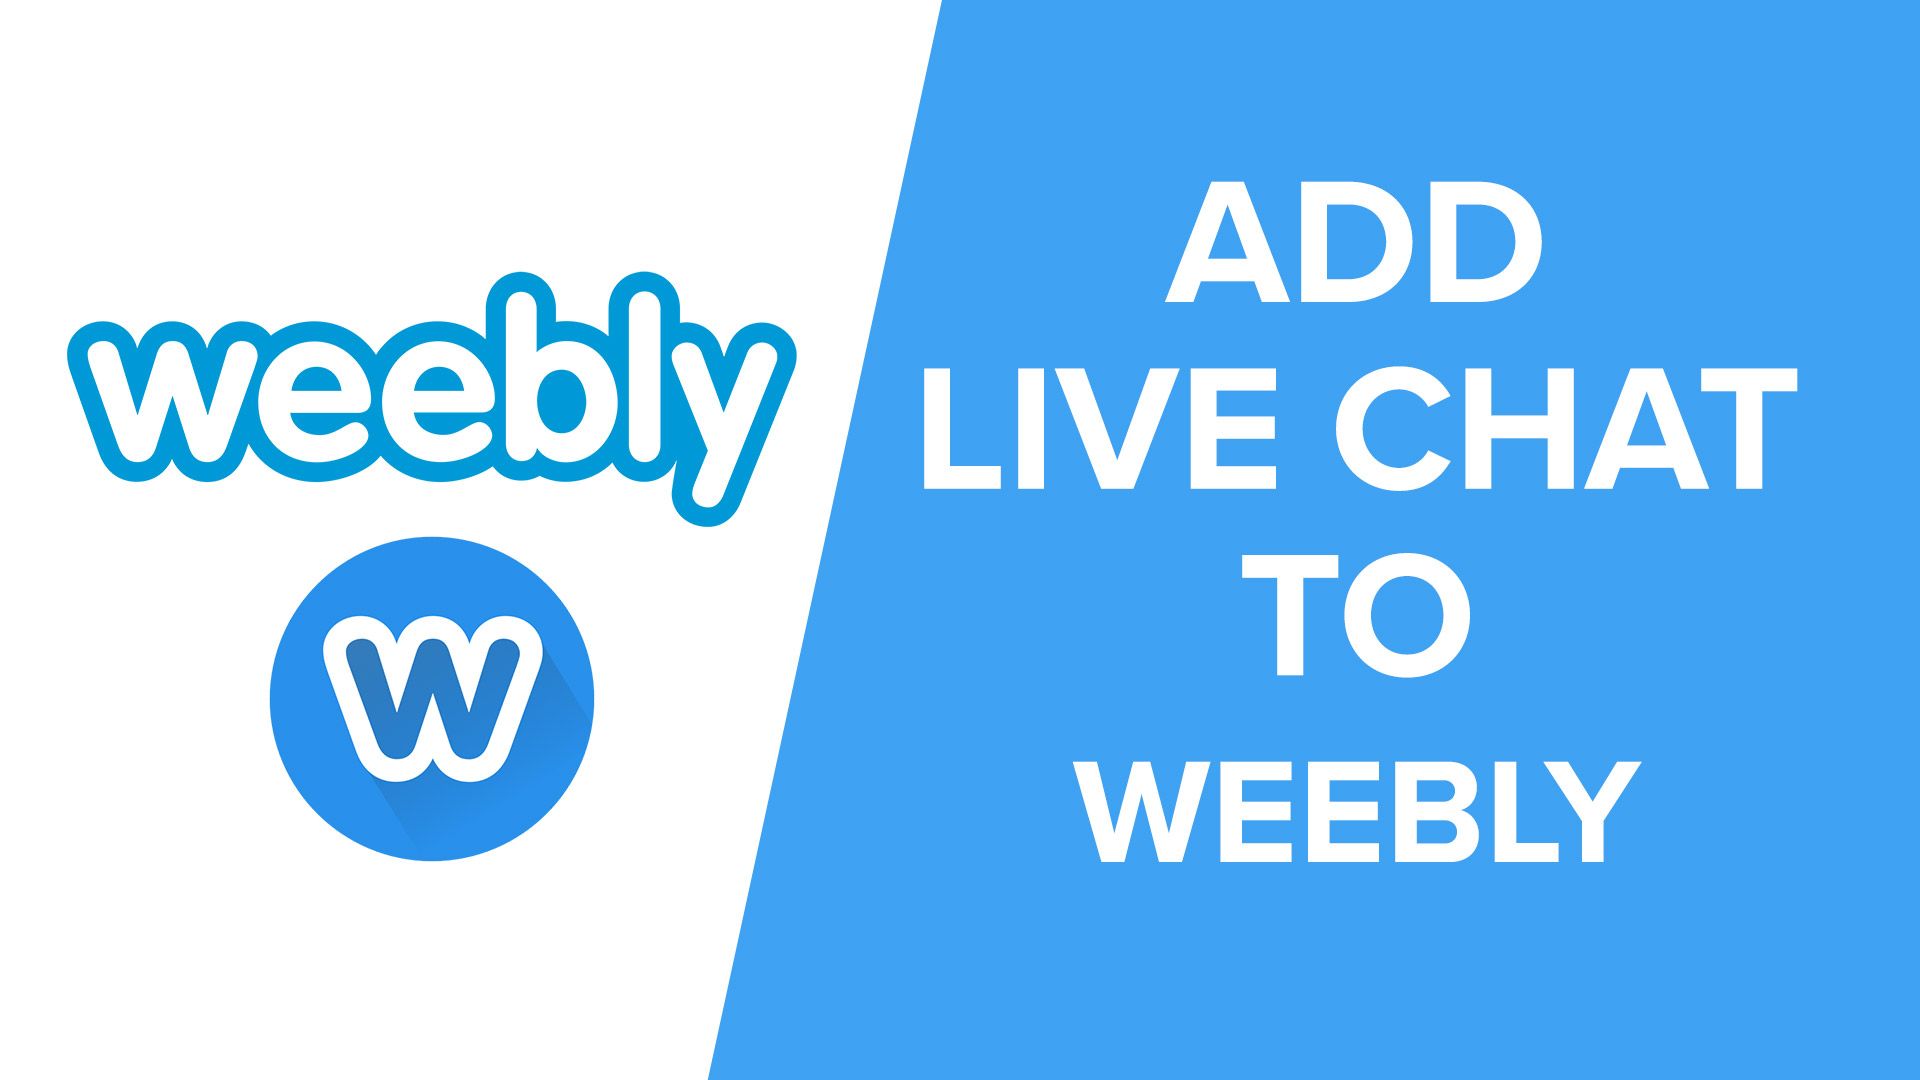 Adding a Live chat To your Weebly Website